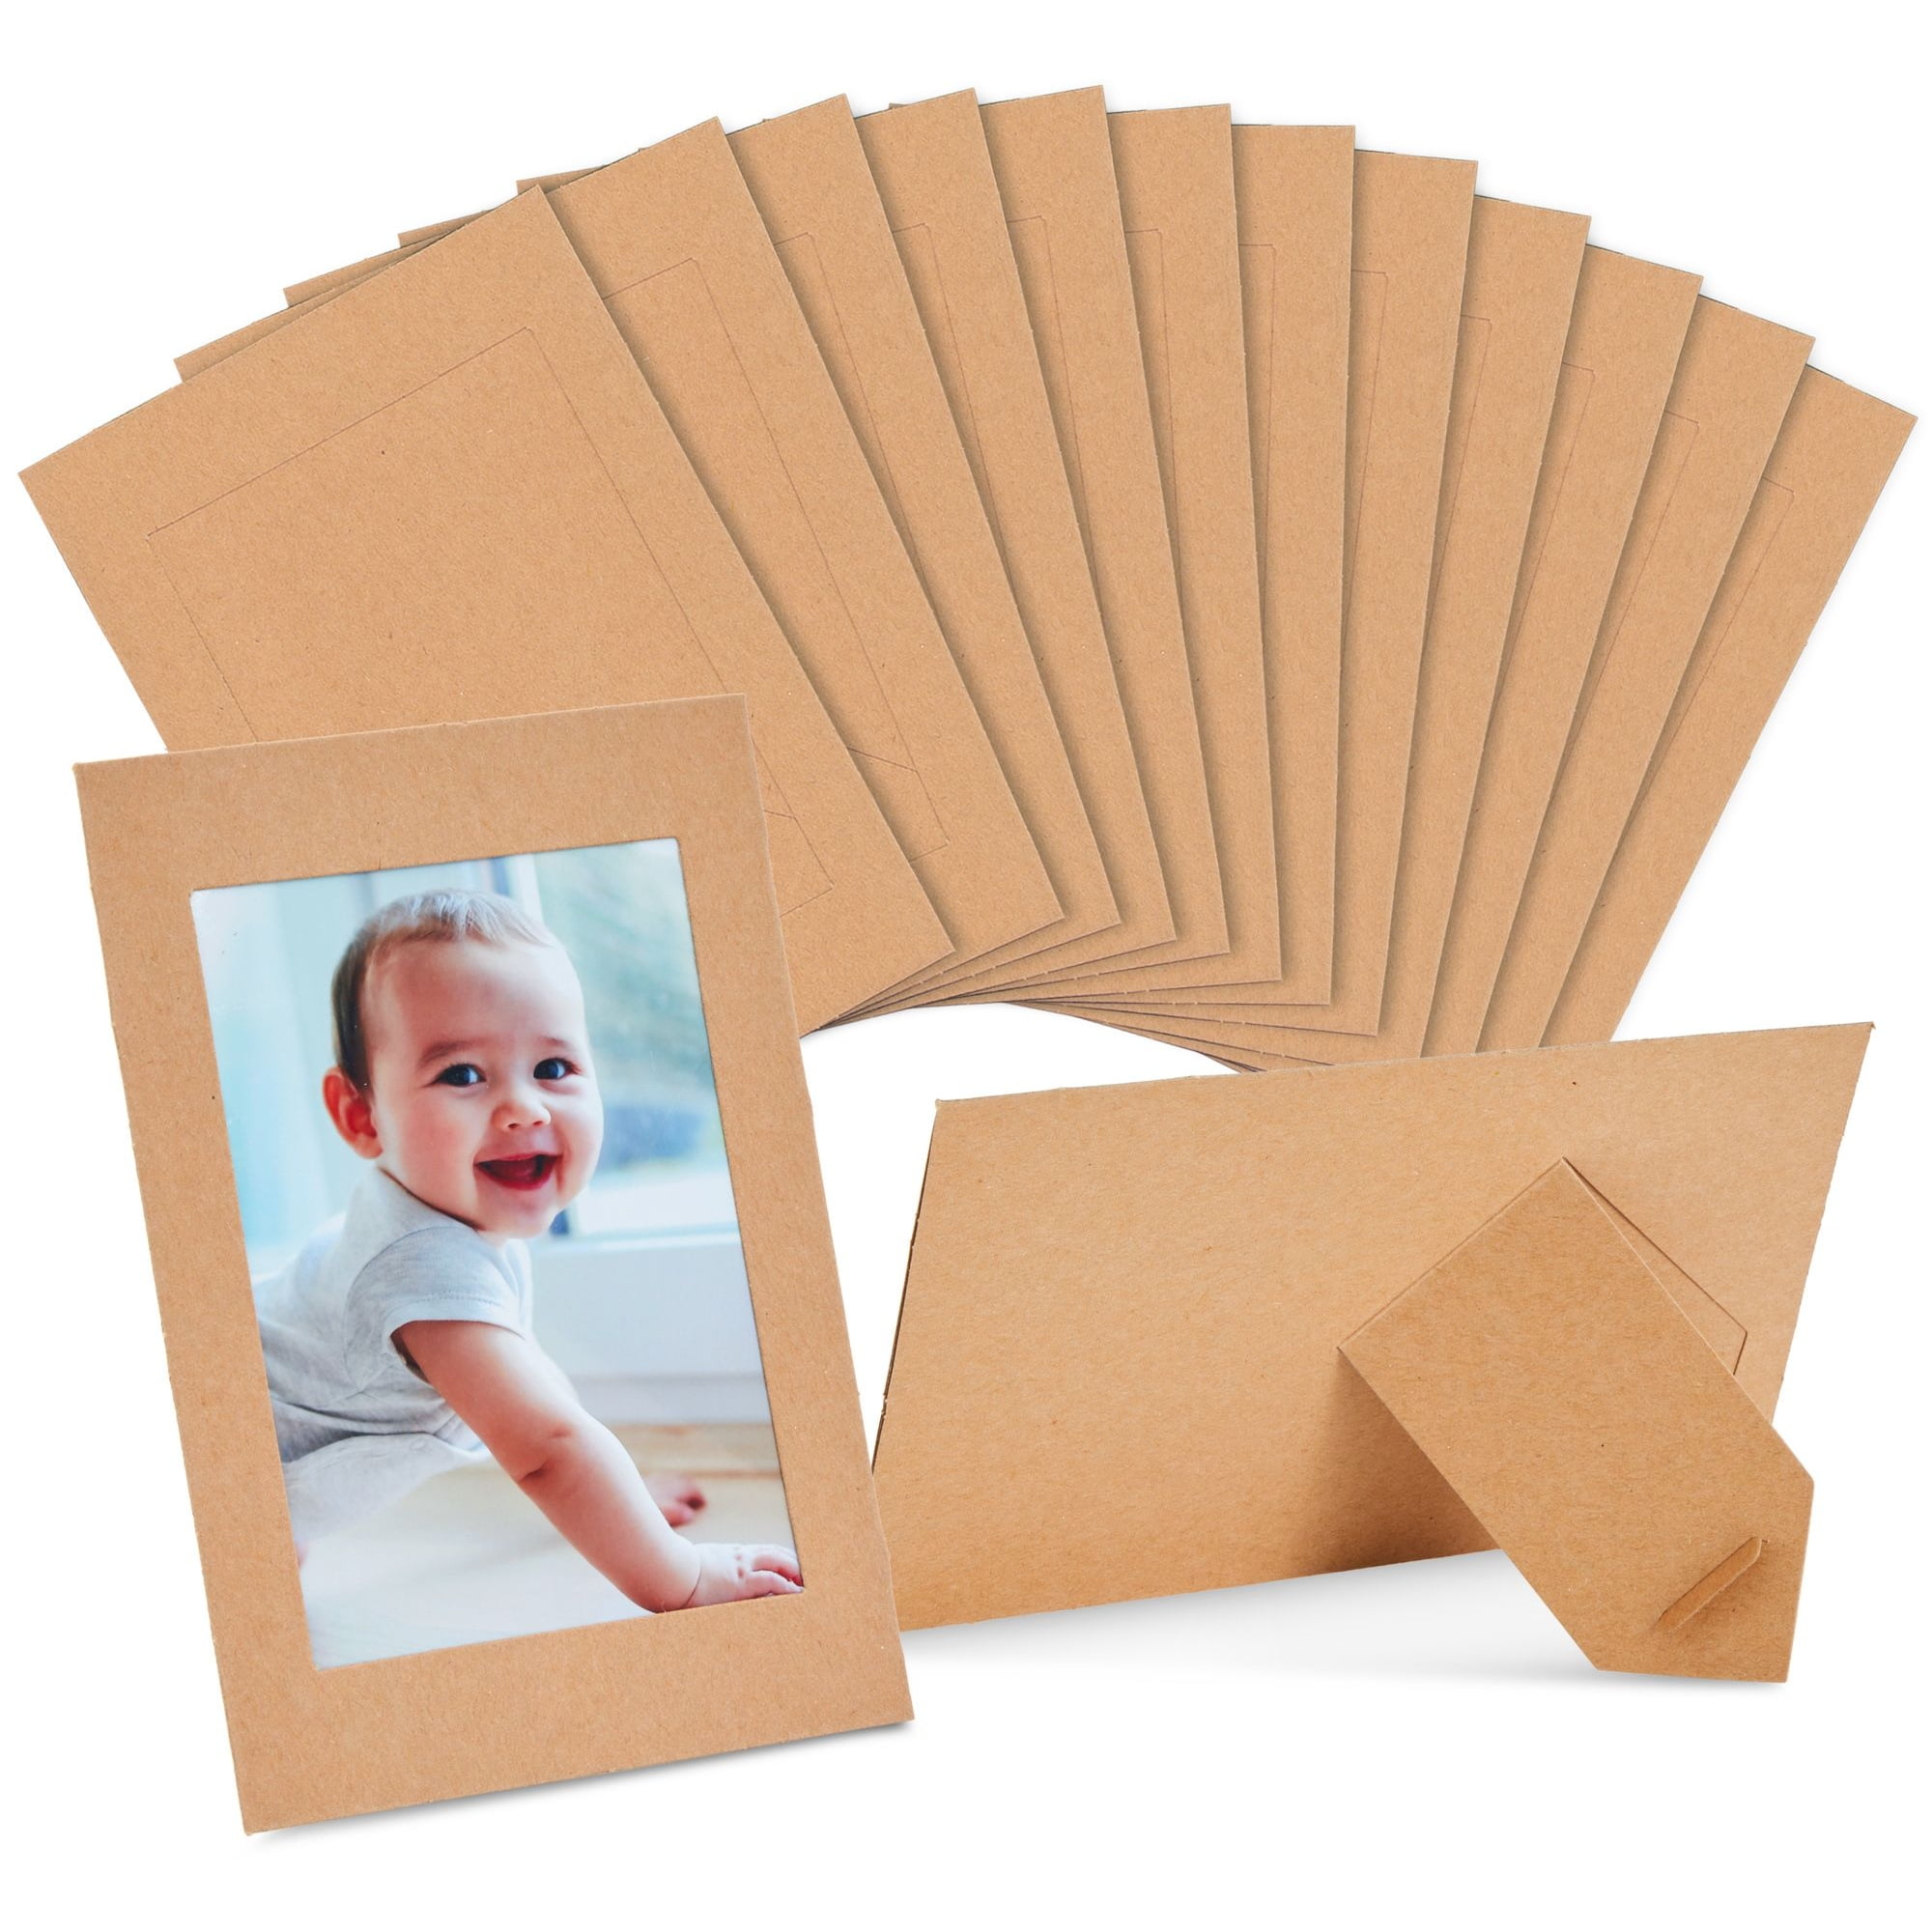 50 Pack Kraft Paper Picture Frames 4x6, Cardboard Photo Easels